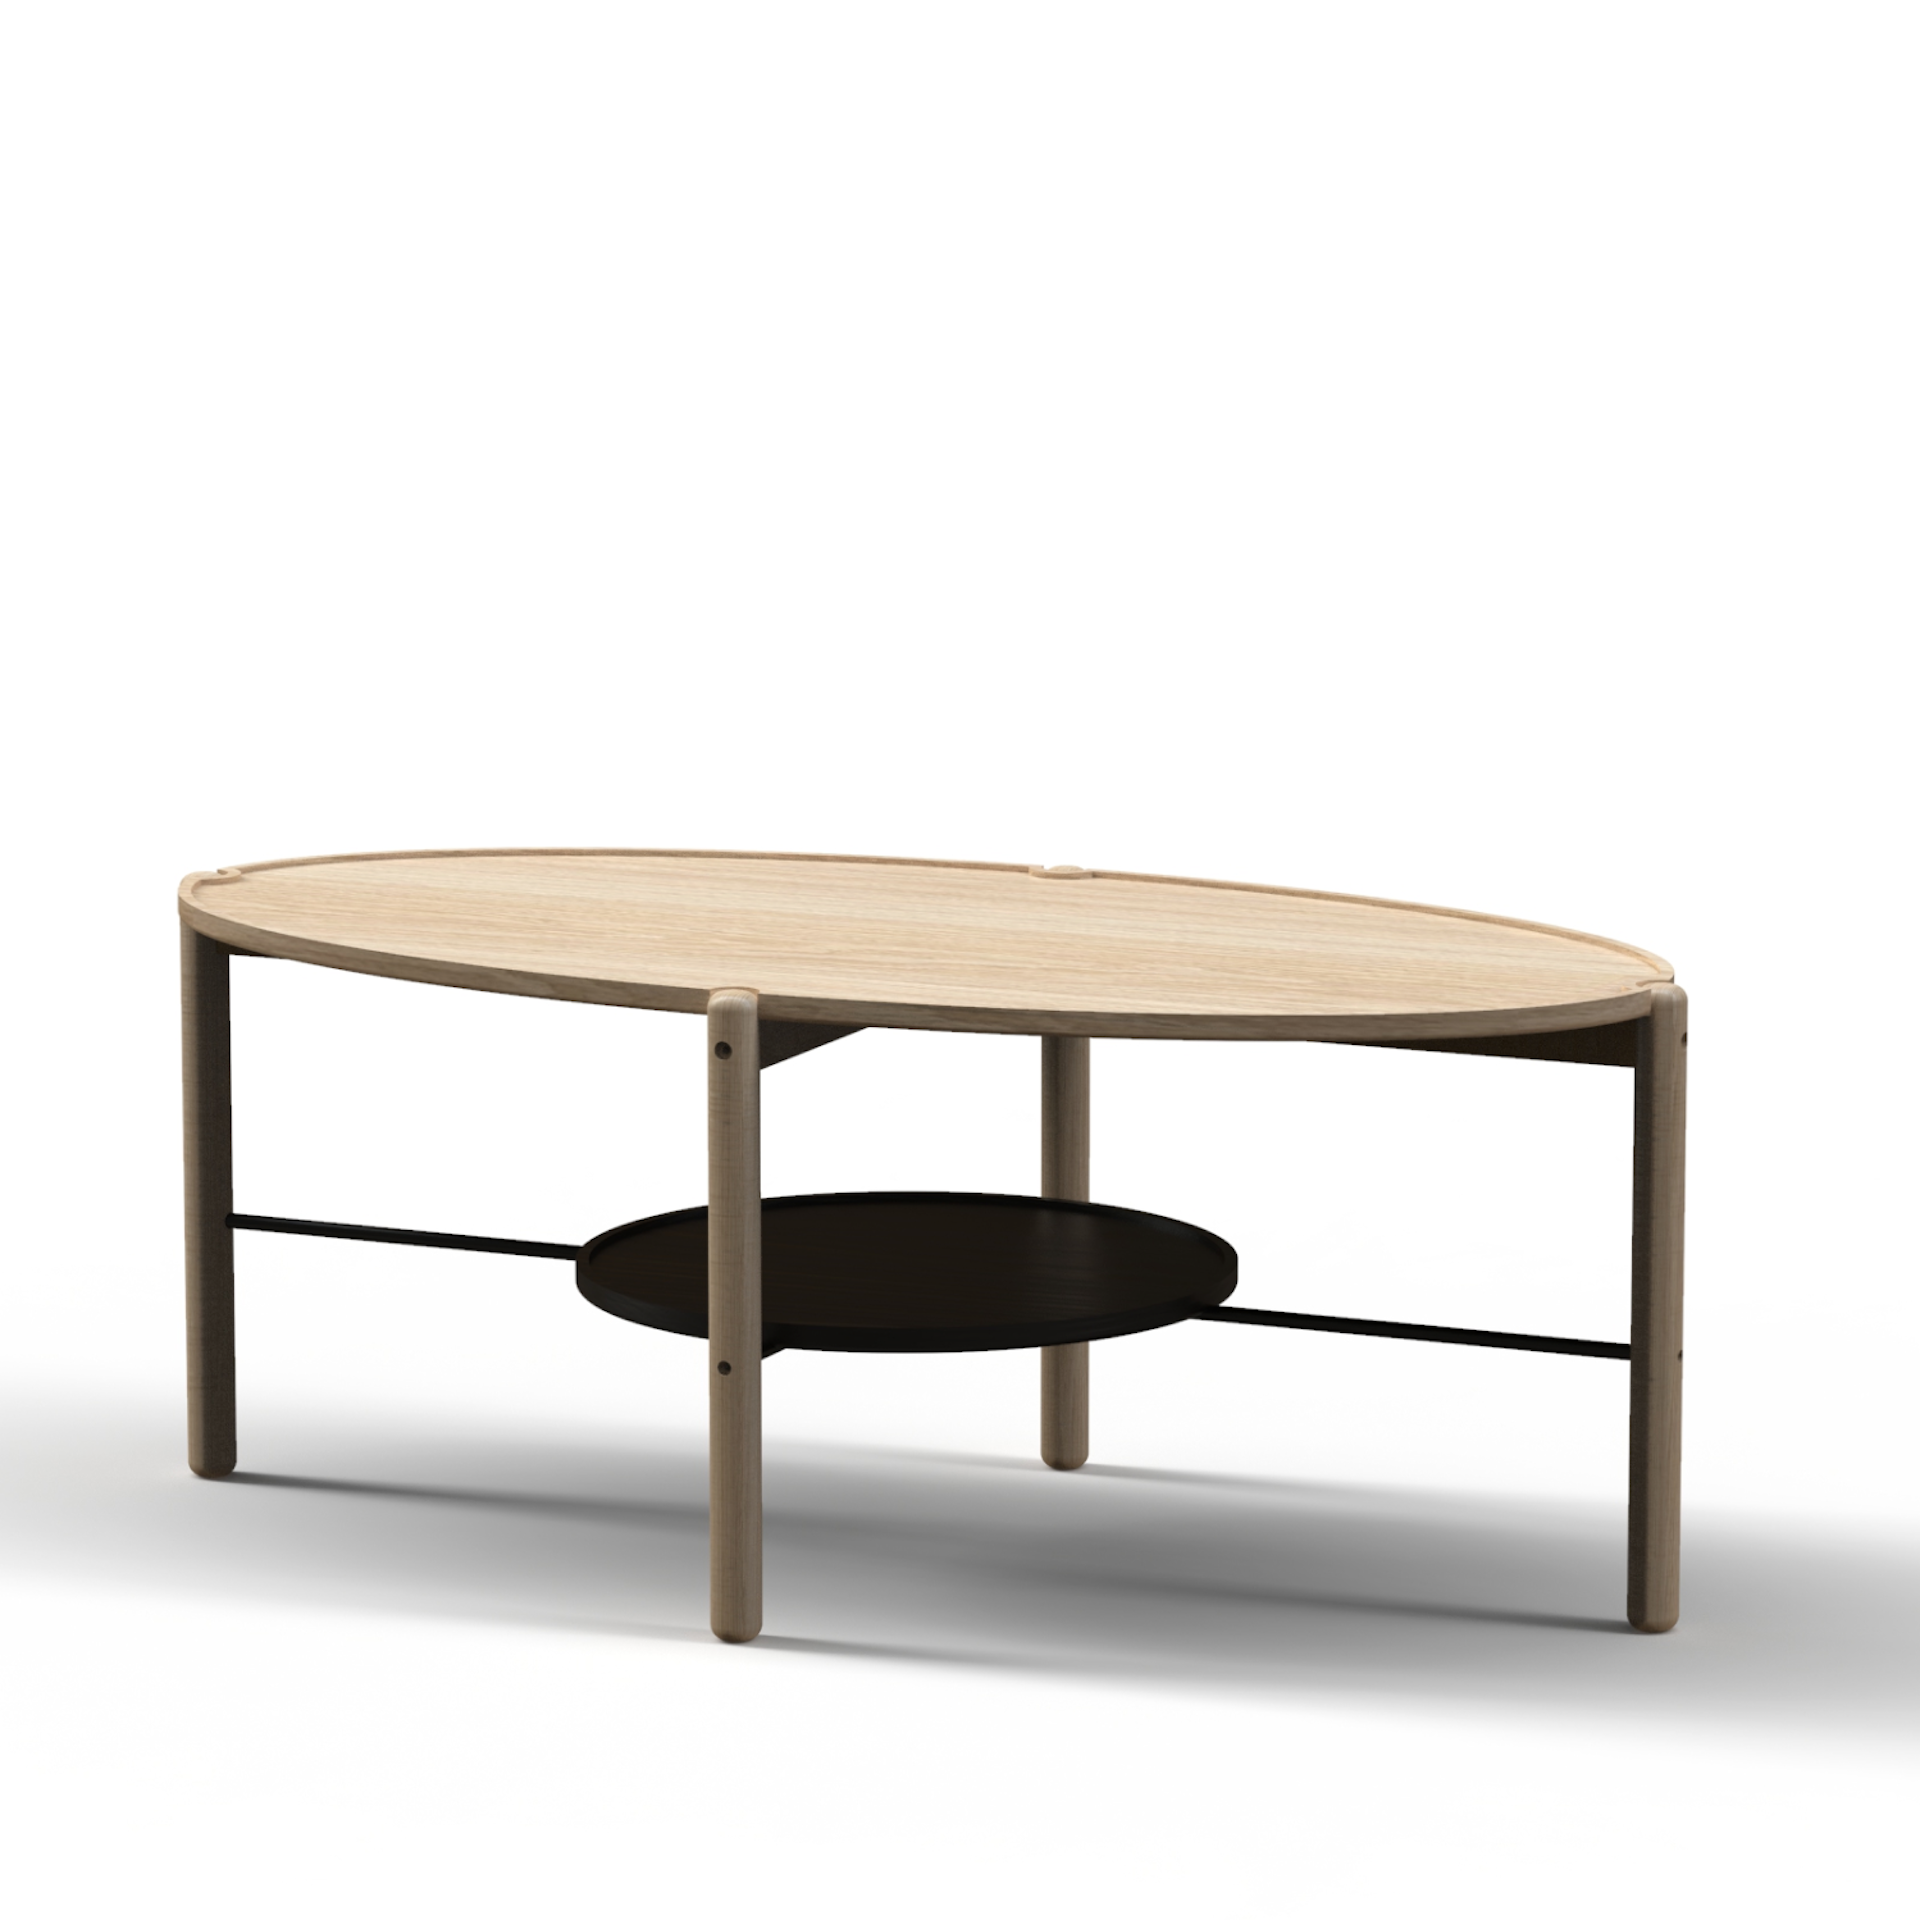 Nora Coffee table - Oval